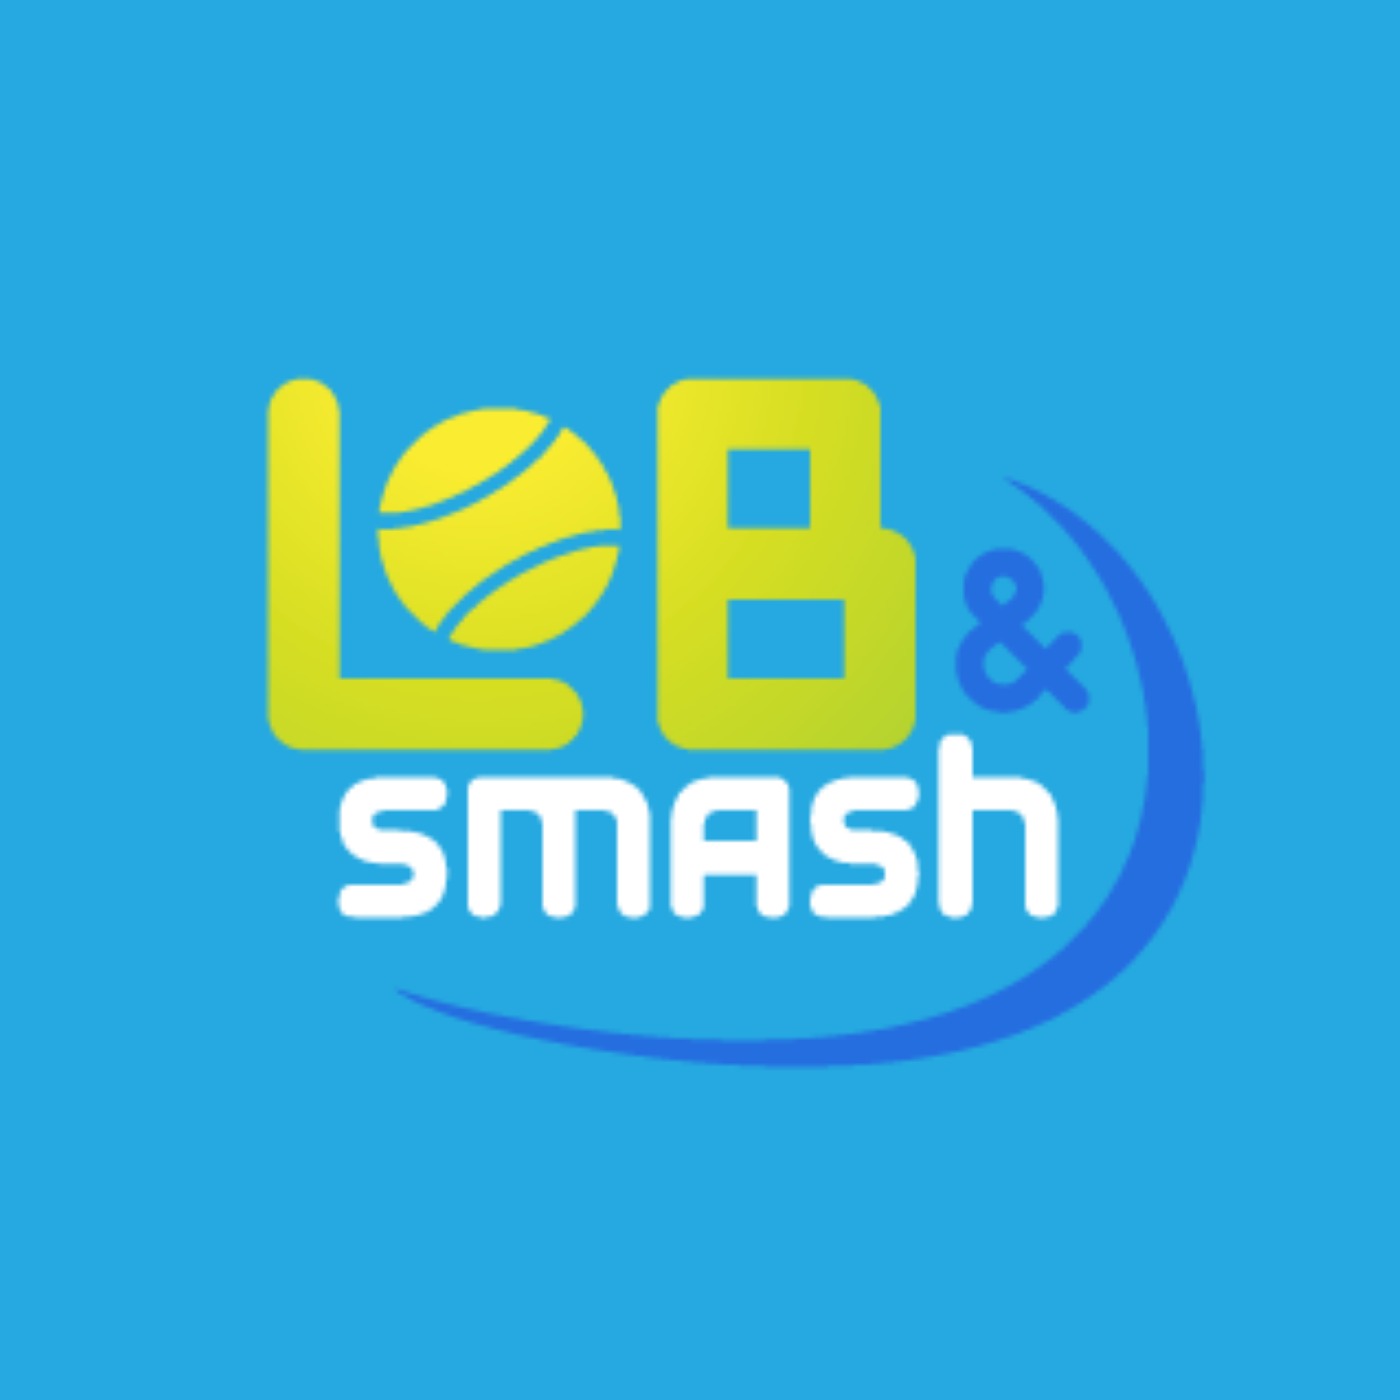 Lob and Smash tennis podcast: Discussing Rafael Nadal, Simona Halep, and more